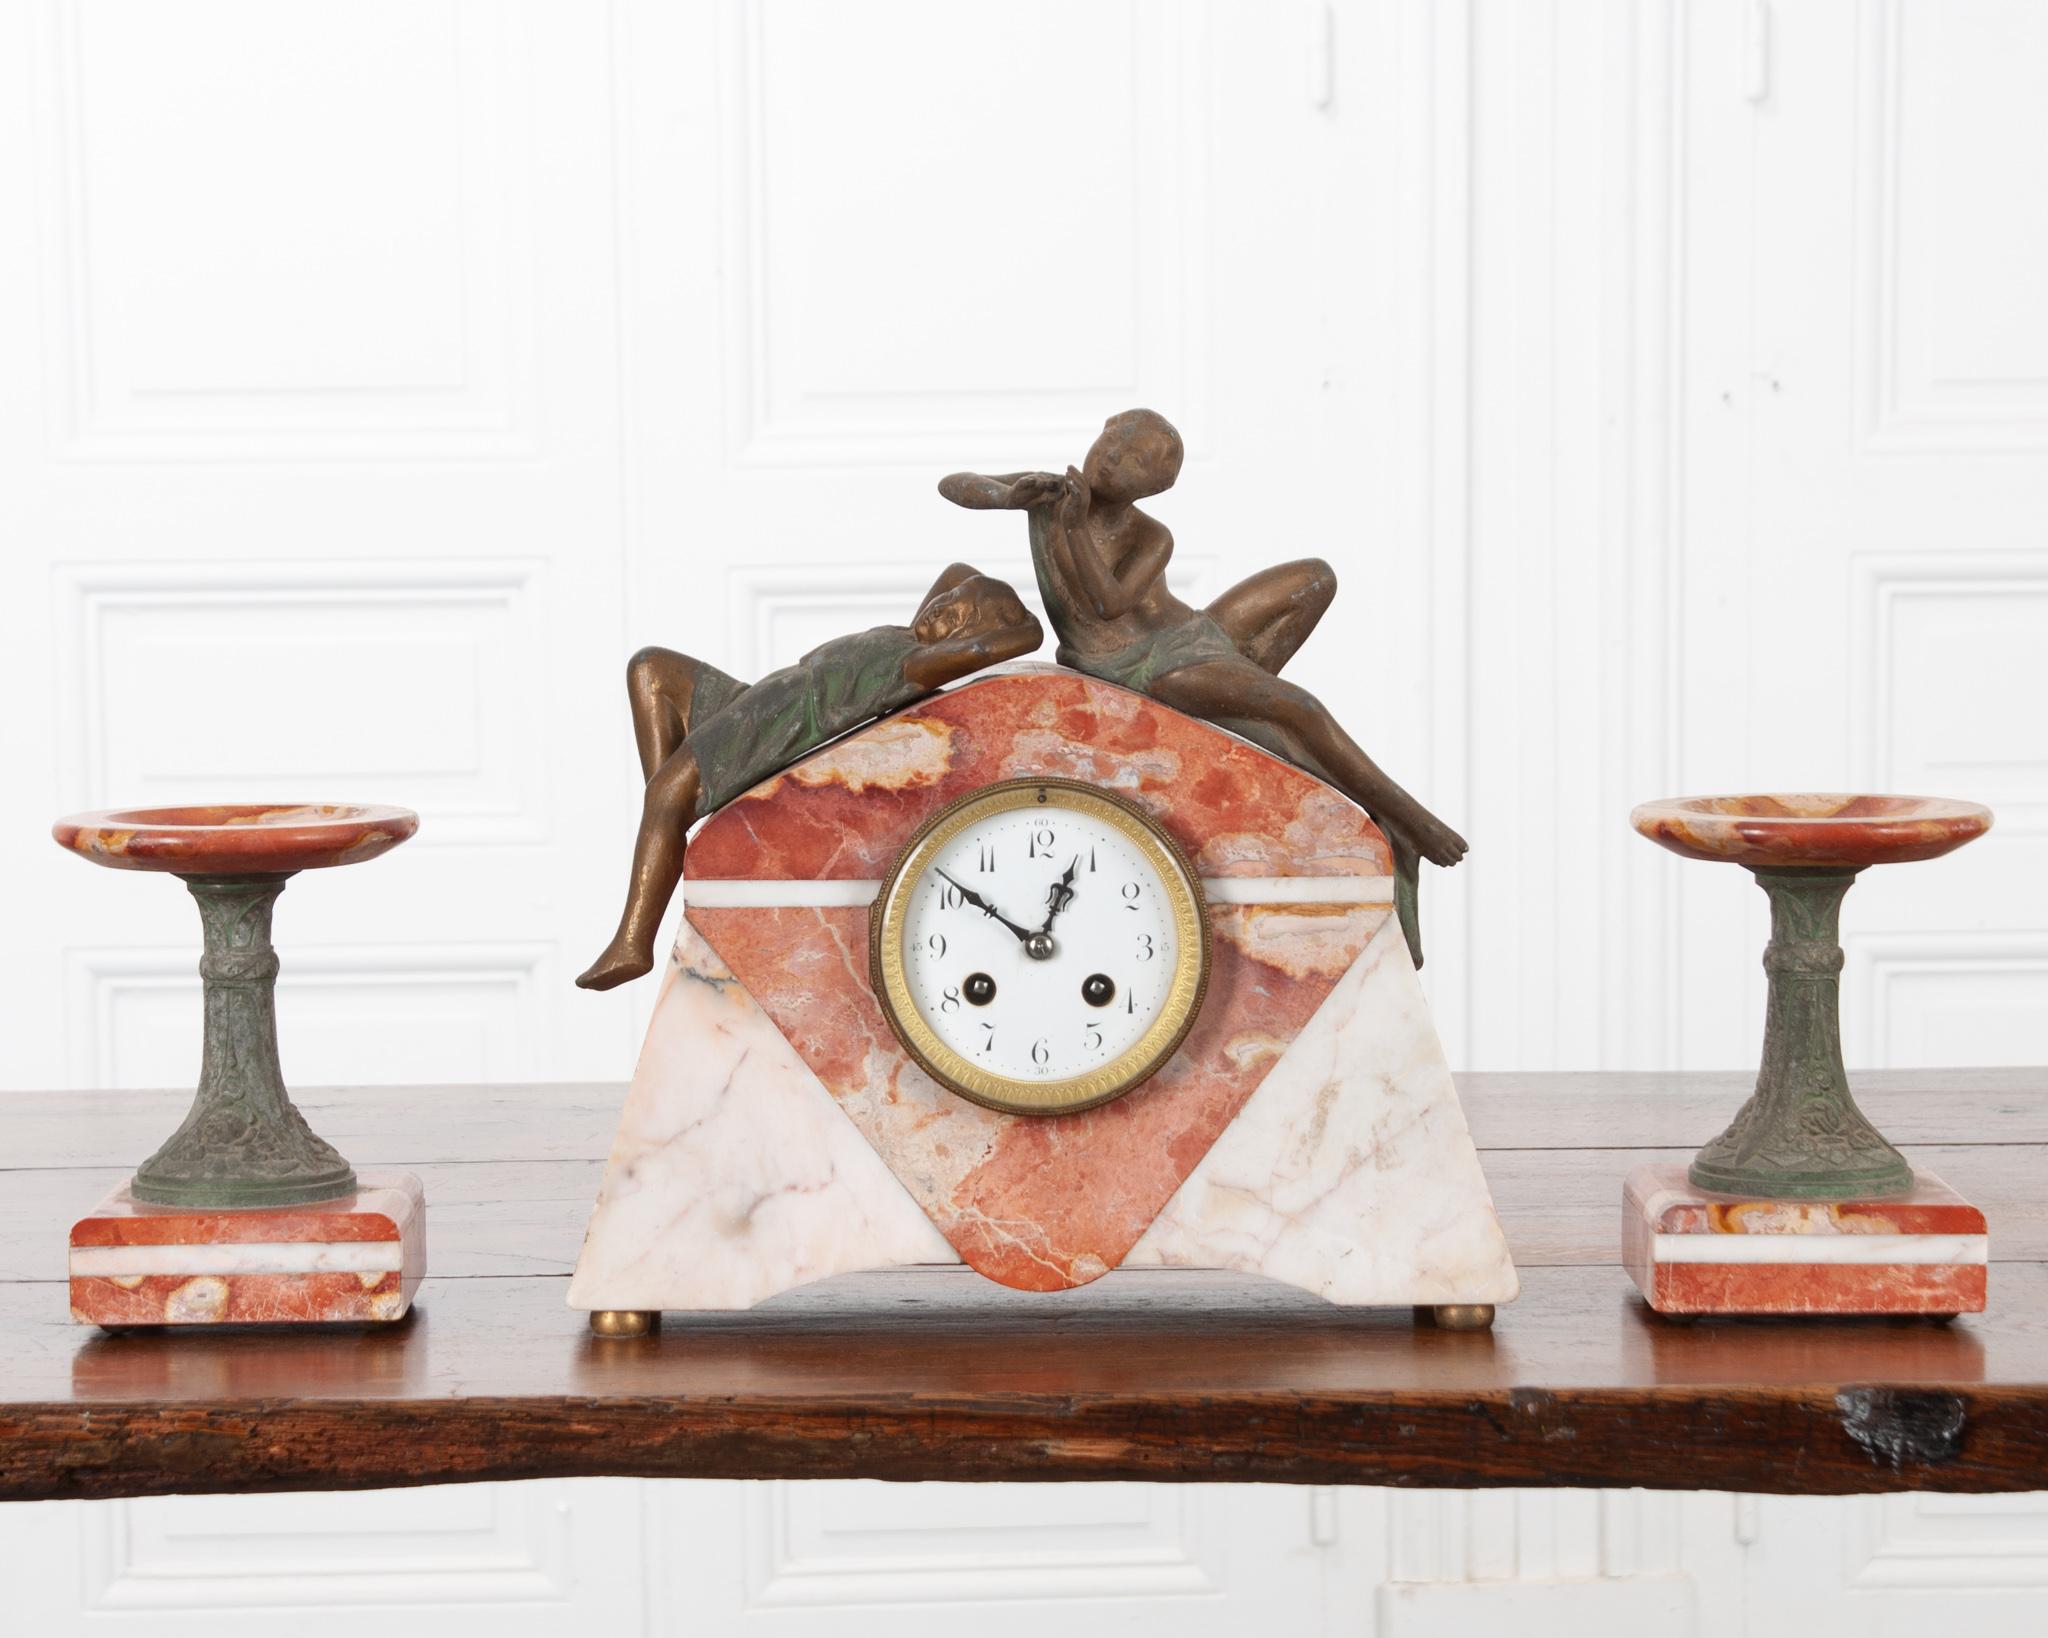 Beautiful and in working condition, this Art Deco mantle clock will add a touch of vintage whimsey to any living space. Created by Pierre Sega, a little known but prolific artist and sculptor in the early 20th century, signed on the male figure. The